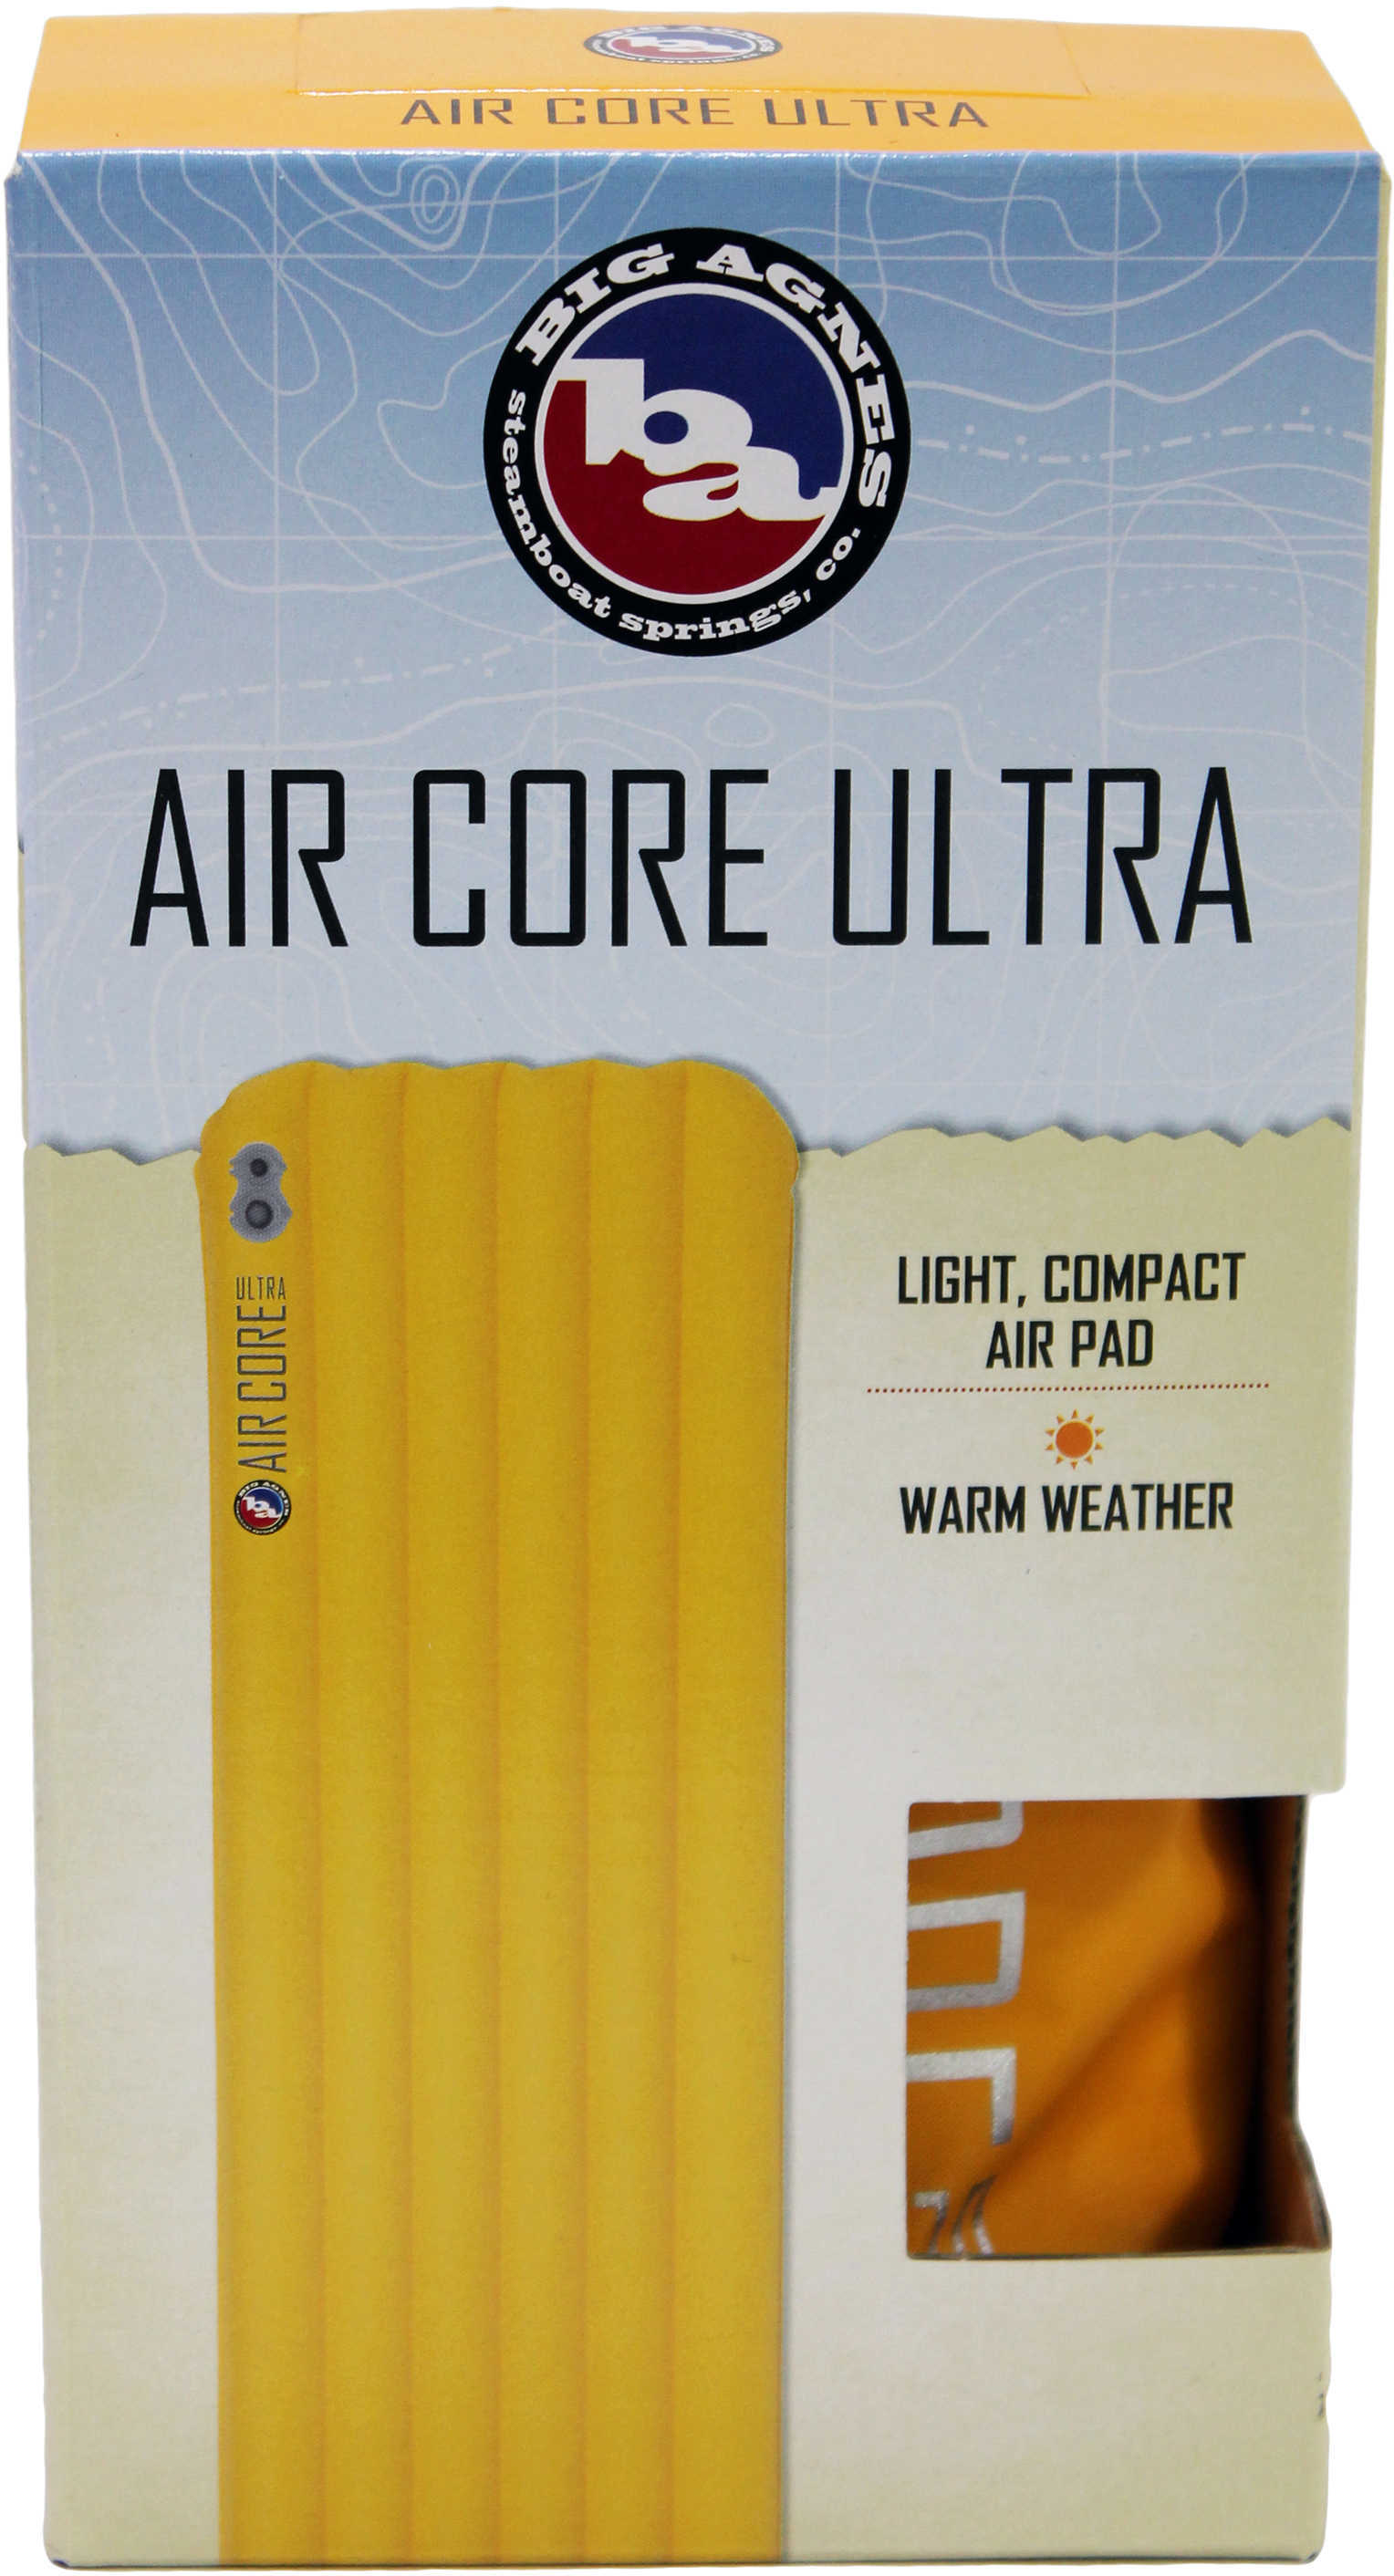 Big Agnes Air Core Ultra Size: 20"x 48", Short Md: PACUS17